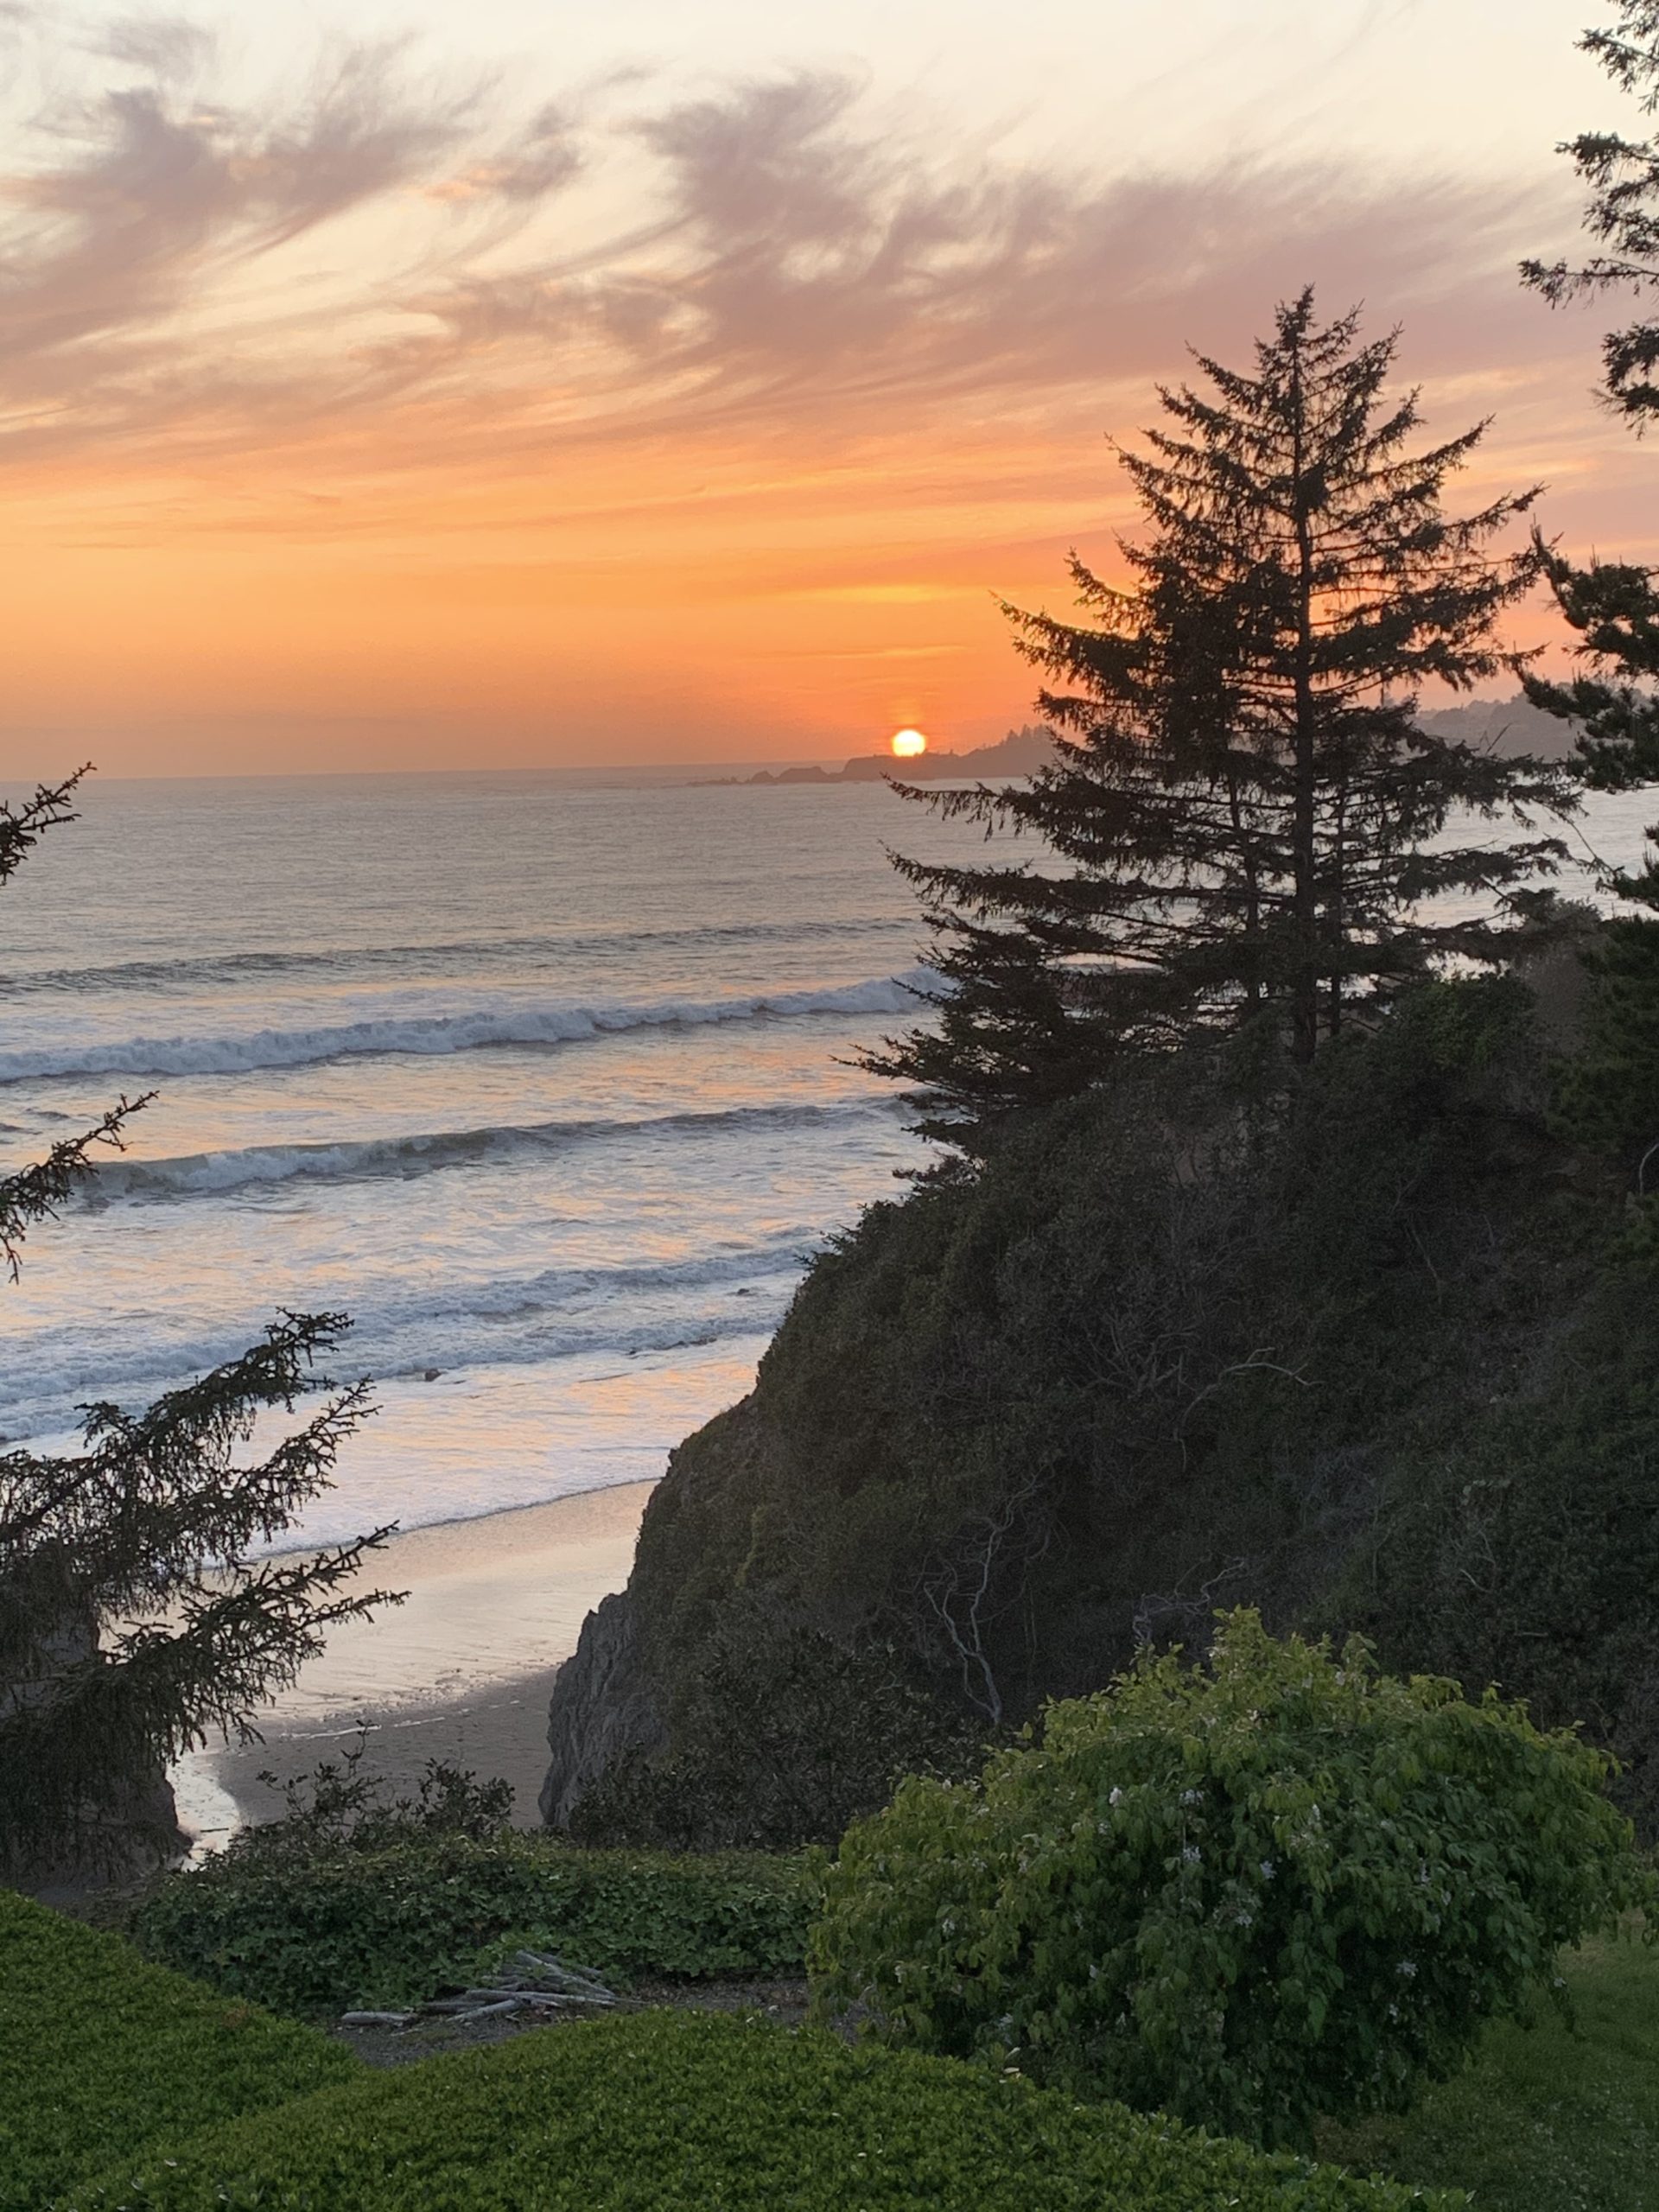 Photo of colorful sunset with oranges and yellow over the ocean from the cliffside